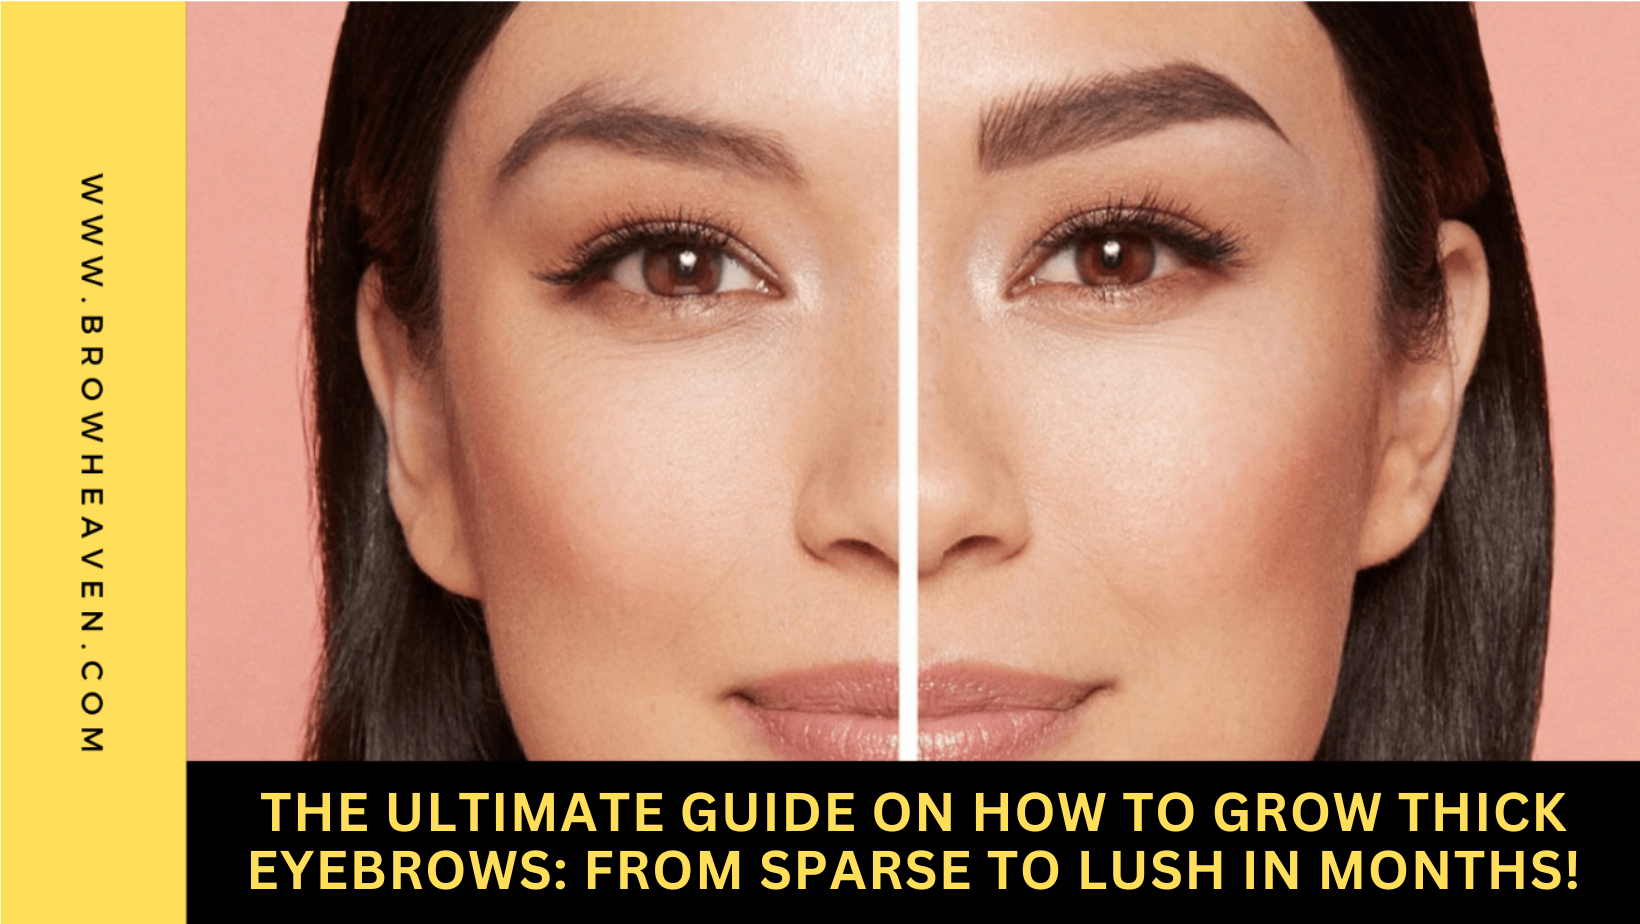 THE ULTIMATE GUIDE ON HOW TO GROW THICK EYEBROWS